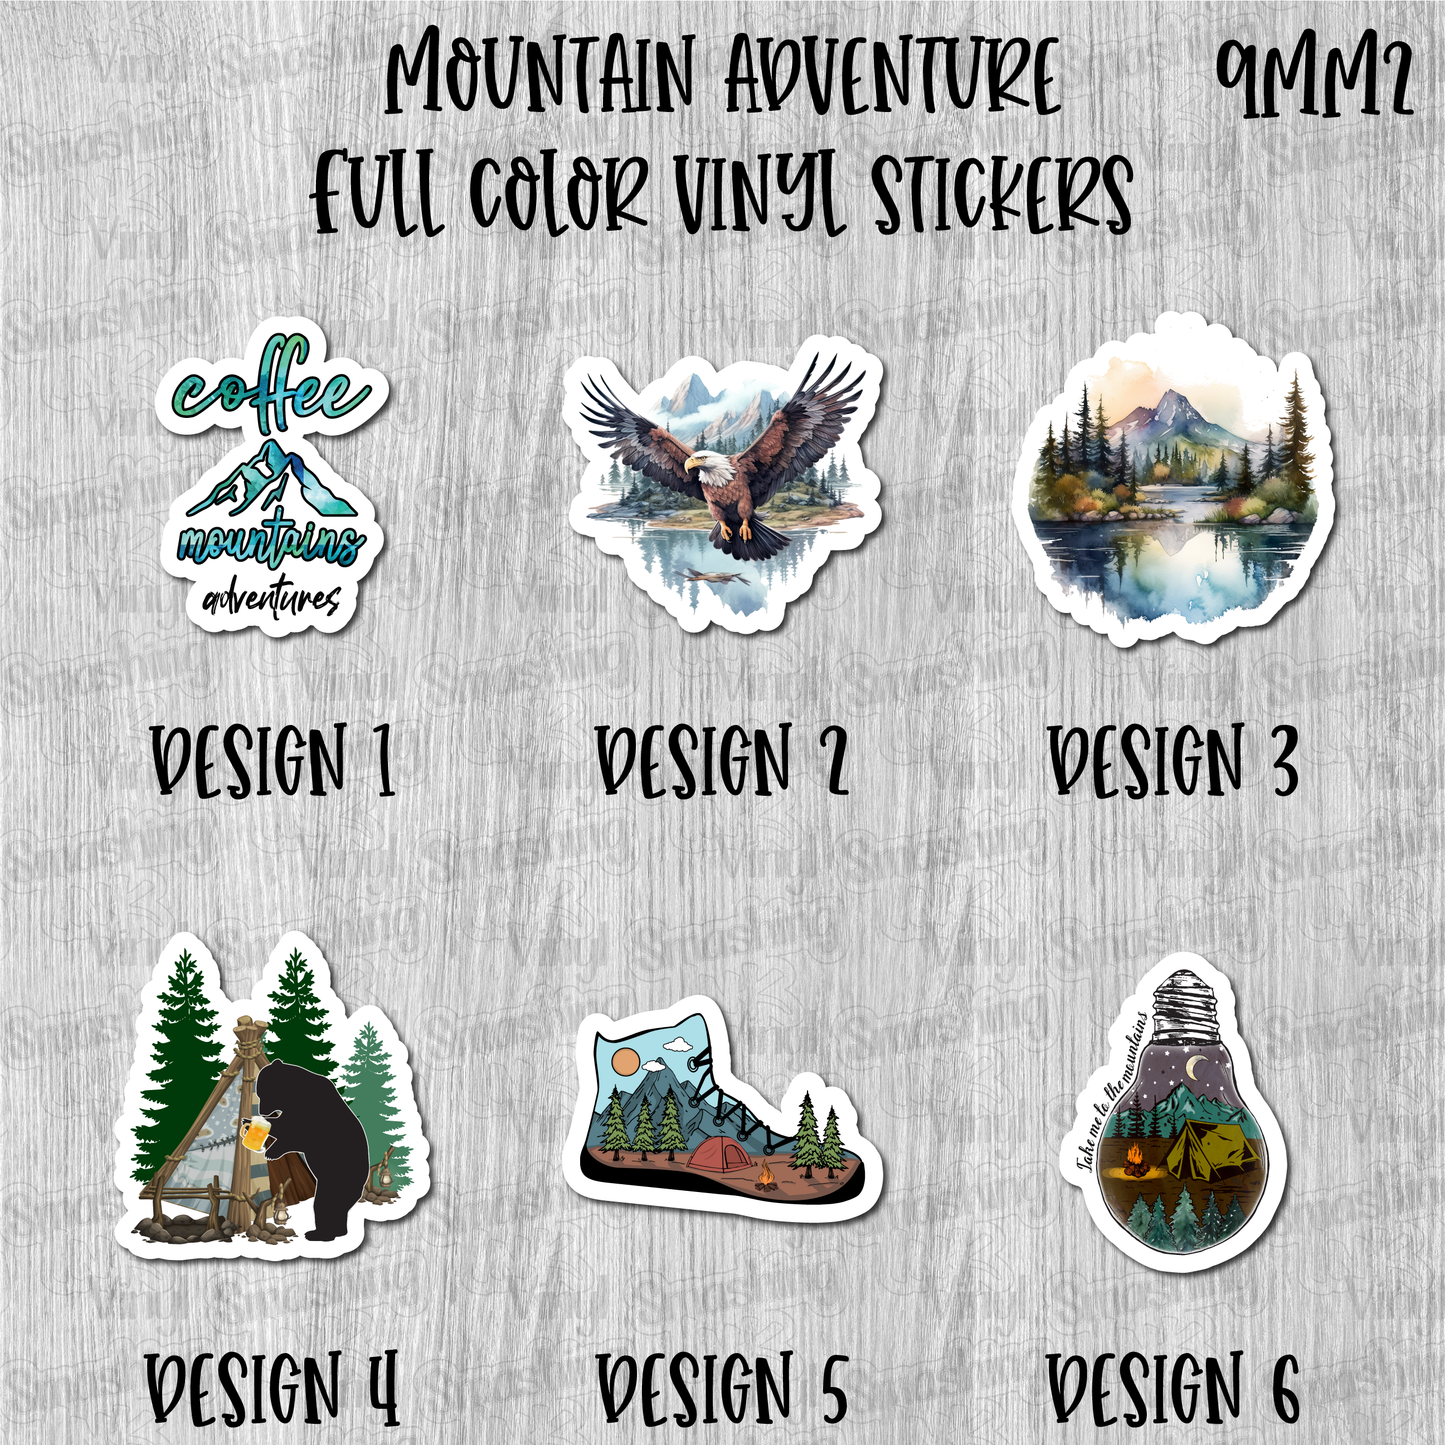 Mountain Adventure - Full Color Vinyl Stickers (SHIPS IN 3-7 BUS DAYS)